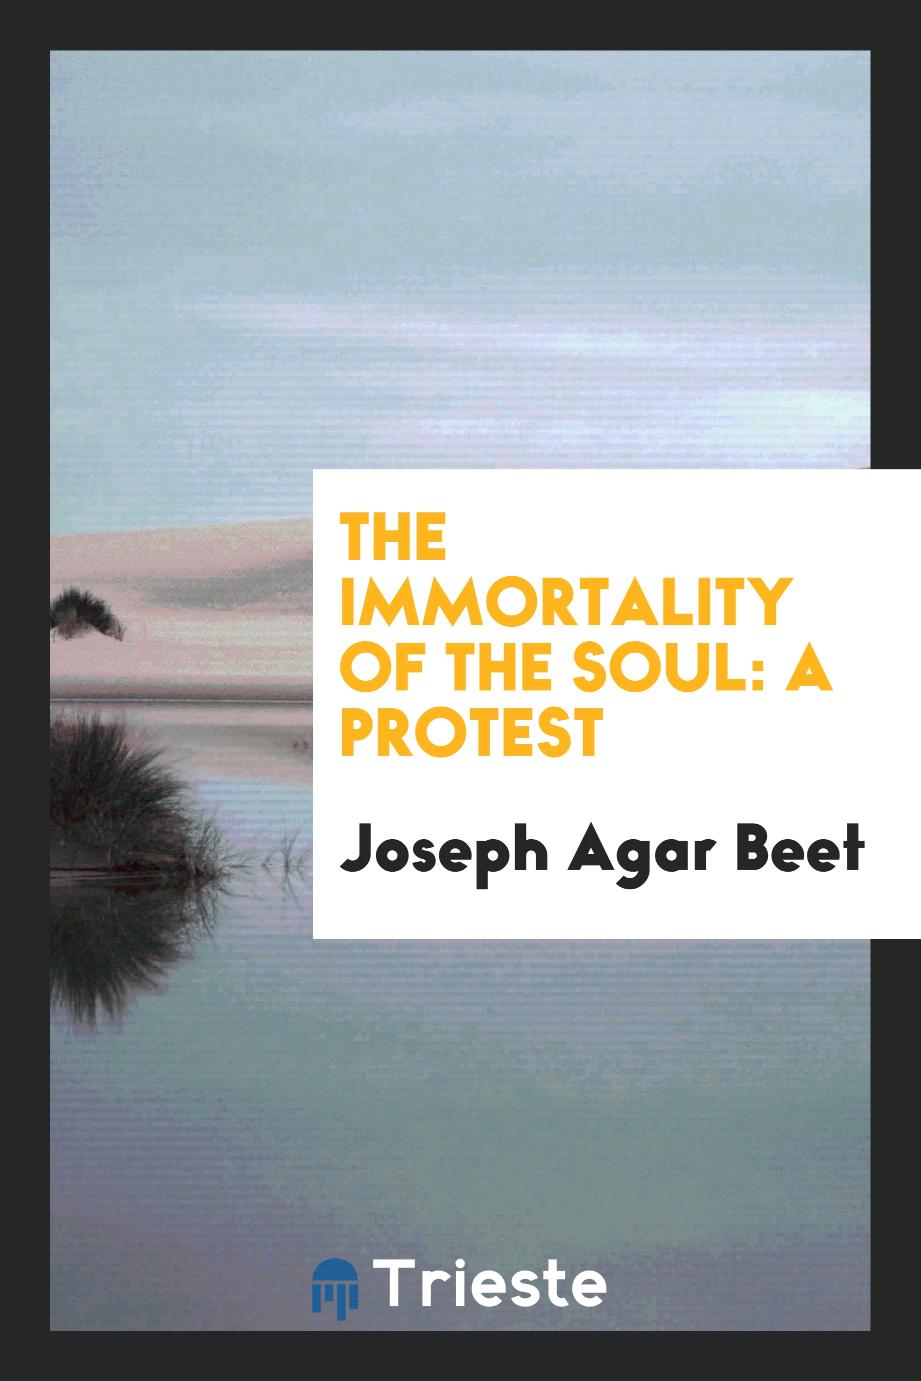 The immortality of the soul: a protest